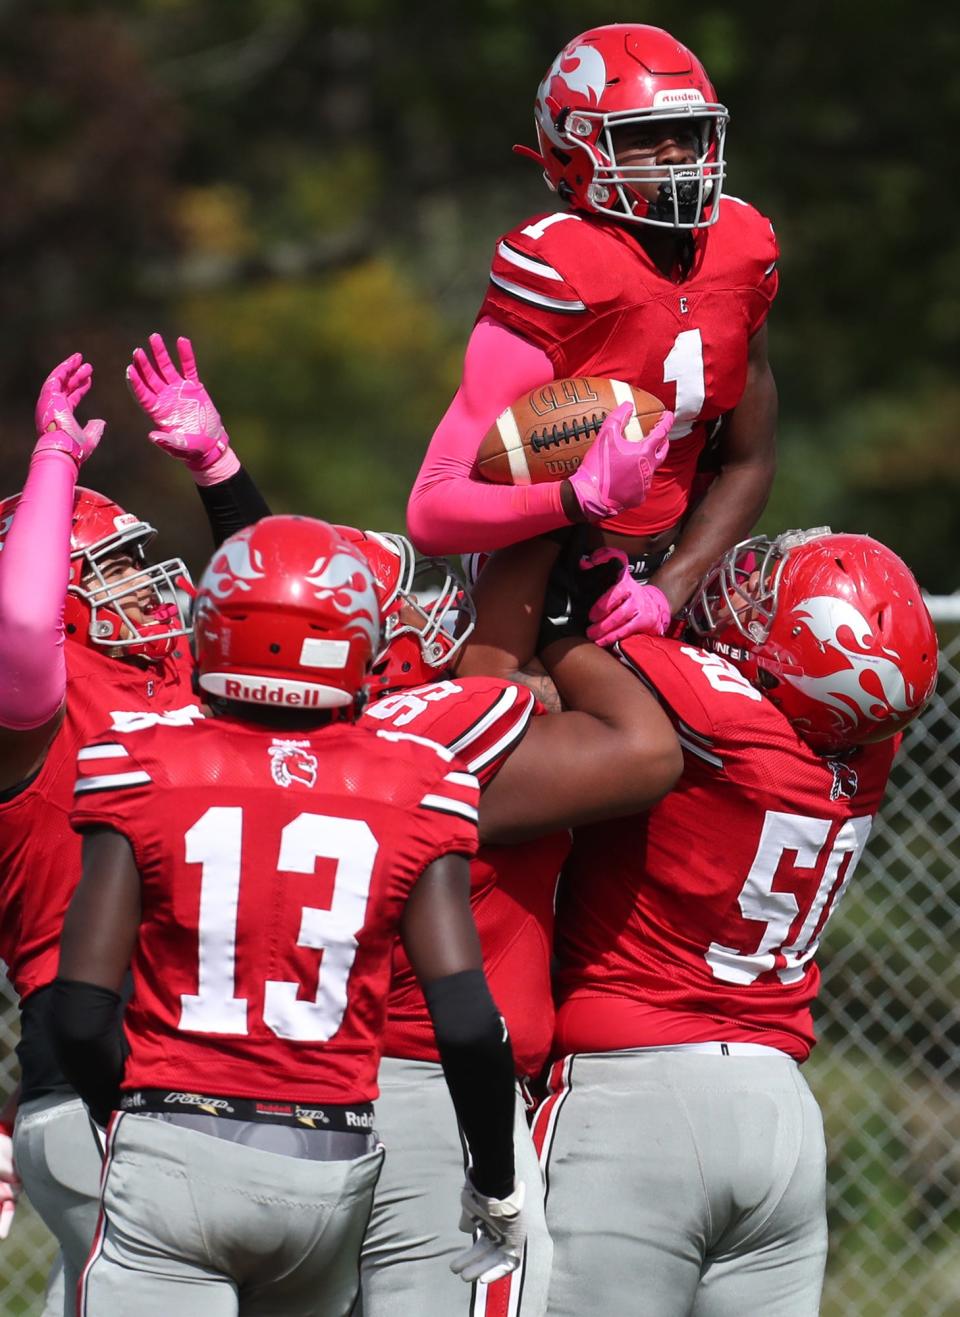 East senior Eric Holley III is lifted up by his teammates after he scored against Buchtel in their City Series game at Buchtel High School on Saturday, Oct, 2, 2021 in Akron. East won the game.